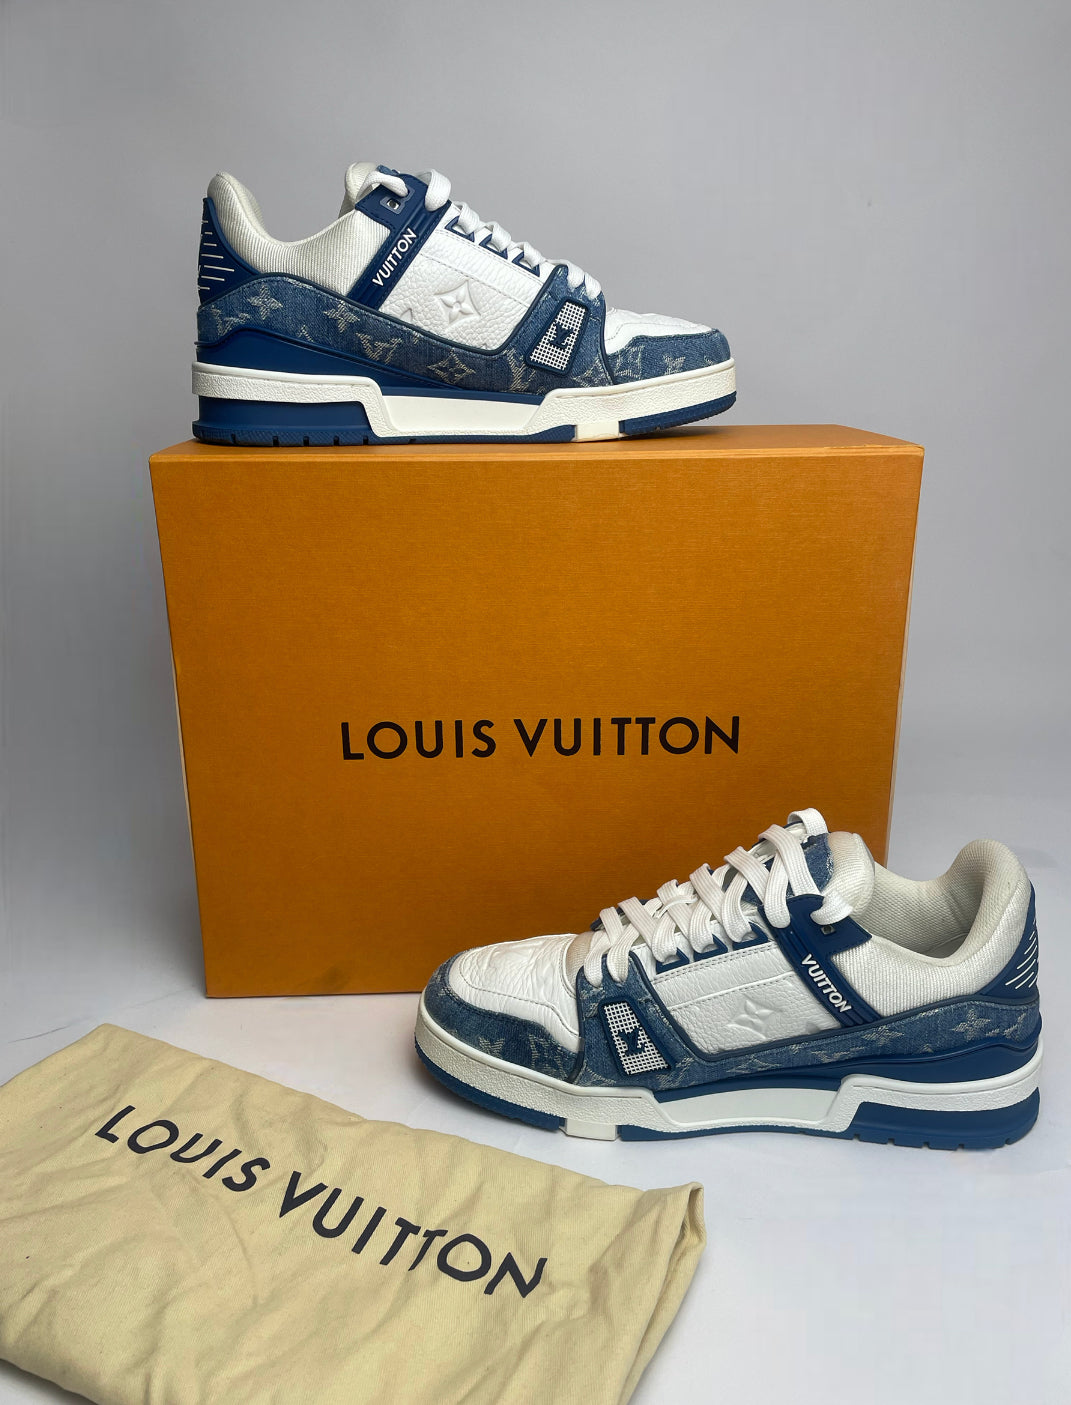 Louis Vuitton Cloth Trainers UK 6 – Allsorts